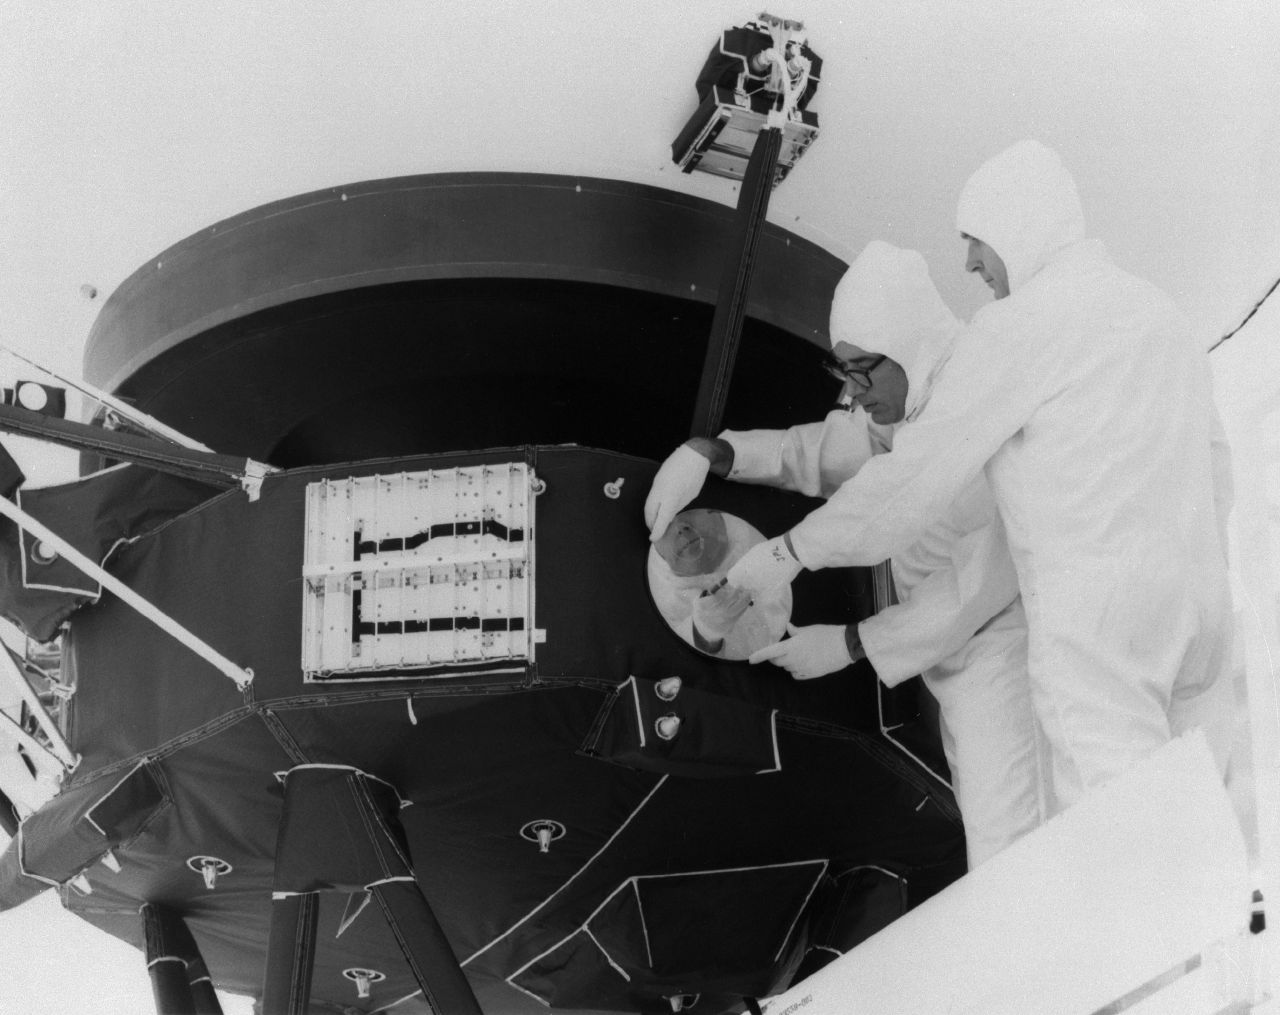 Two men in white cleanroom suites attach the golden record to the side of the Voyager spacecraft.